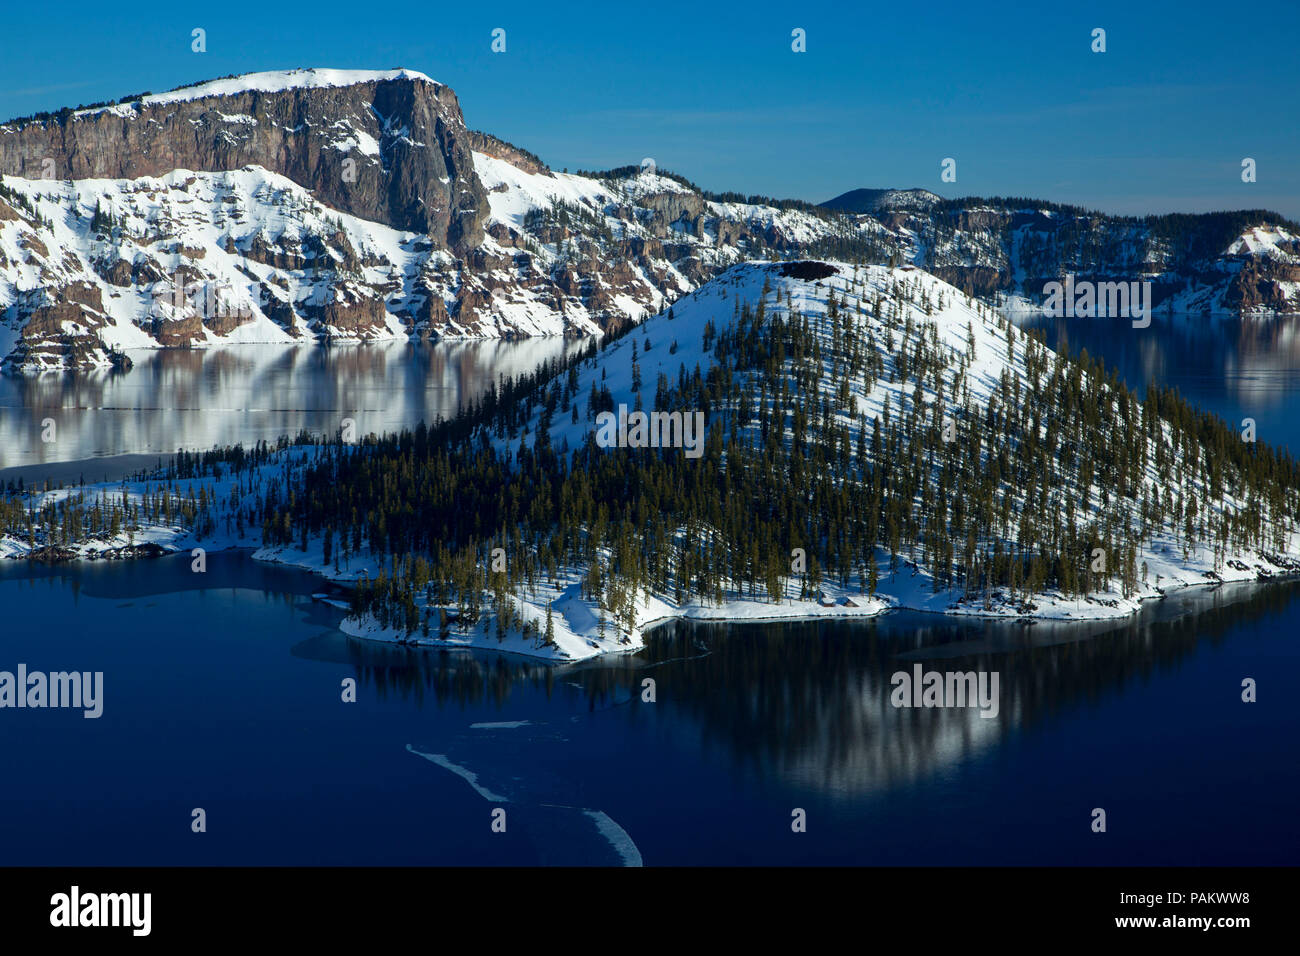 Wizard Island with Llao Rock, Crater Lake National Park, Oregon Stock Photo